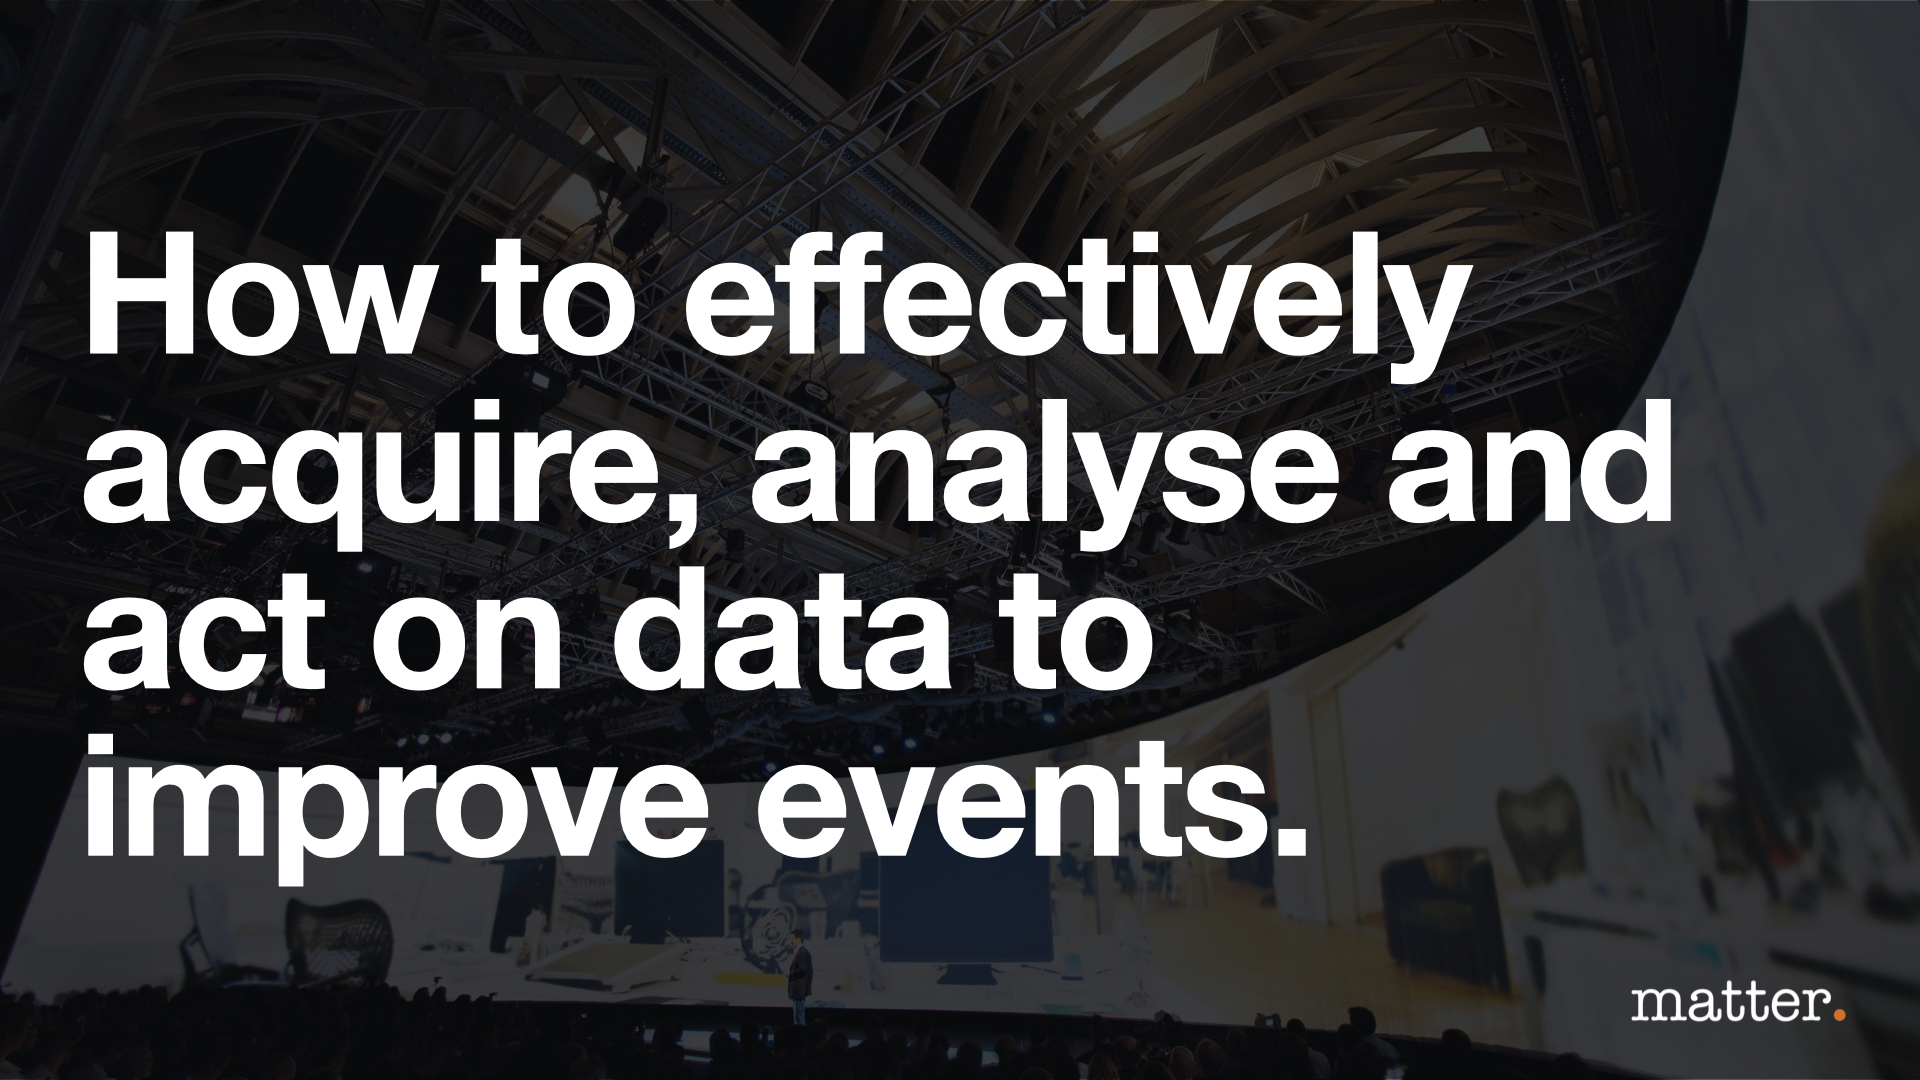 Act on data to improve events